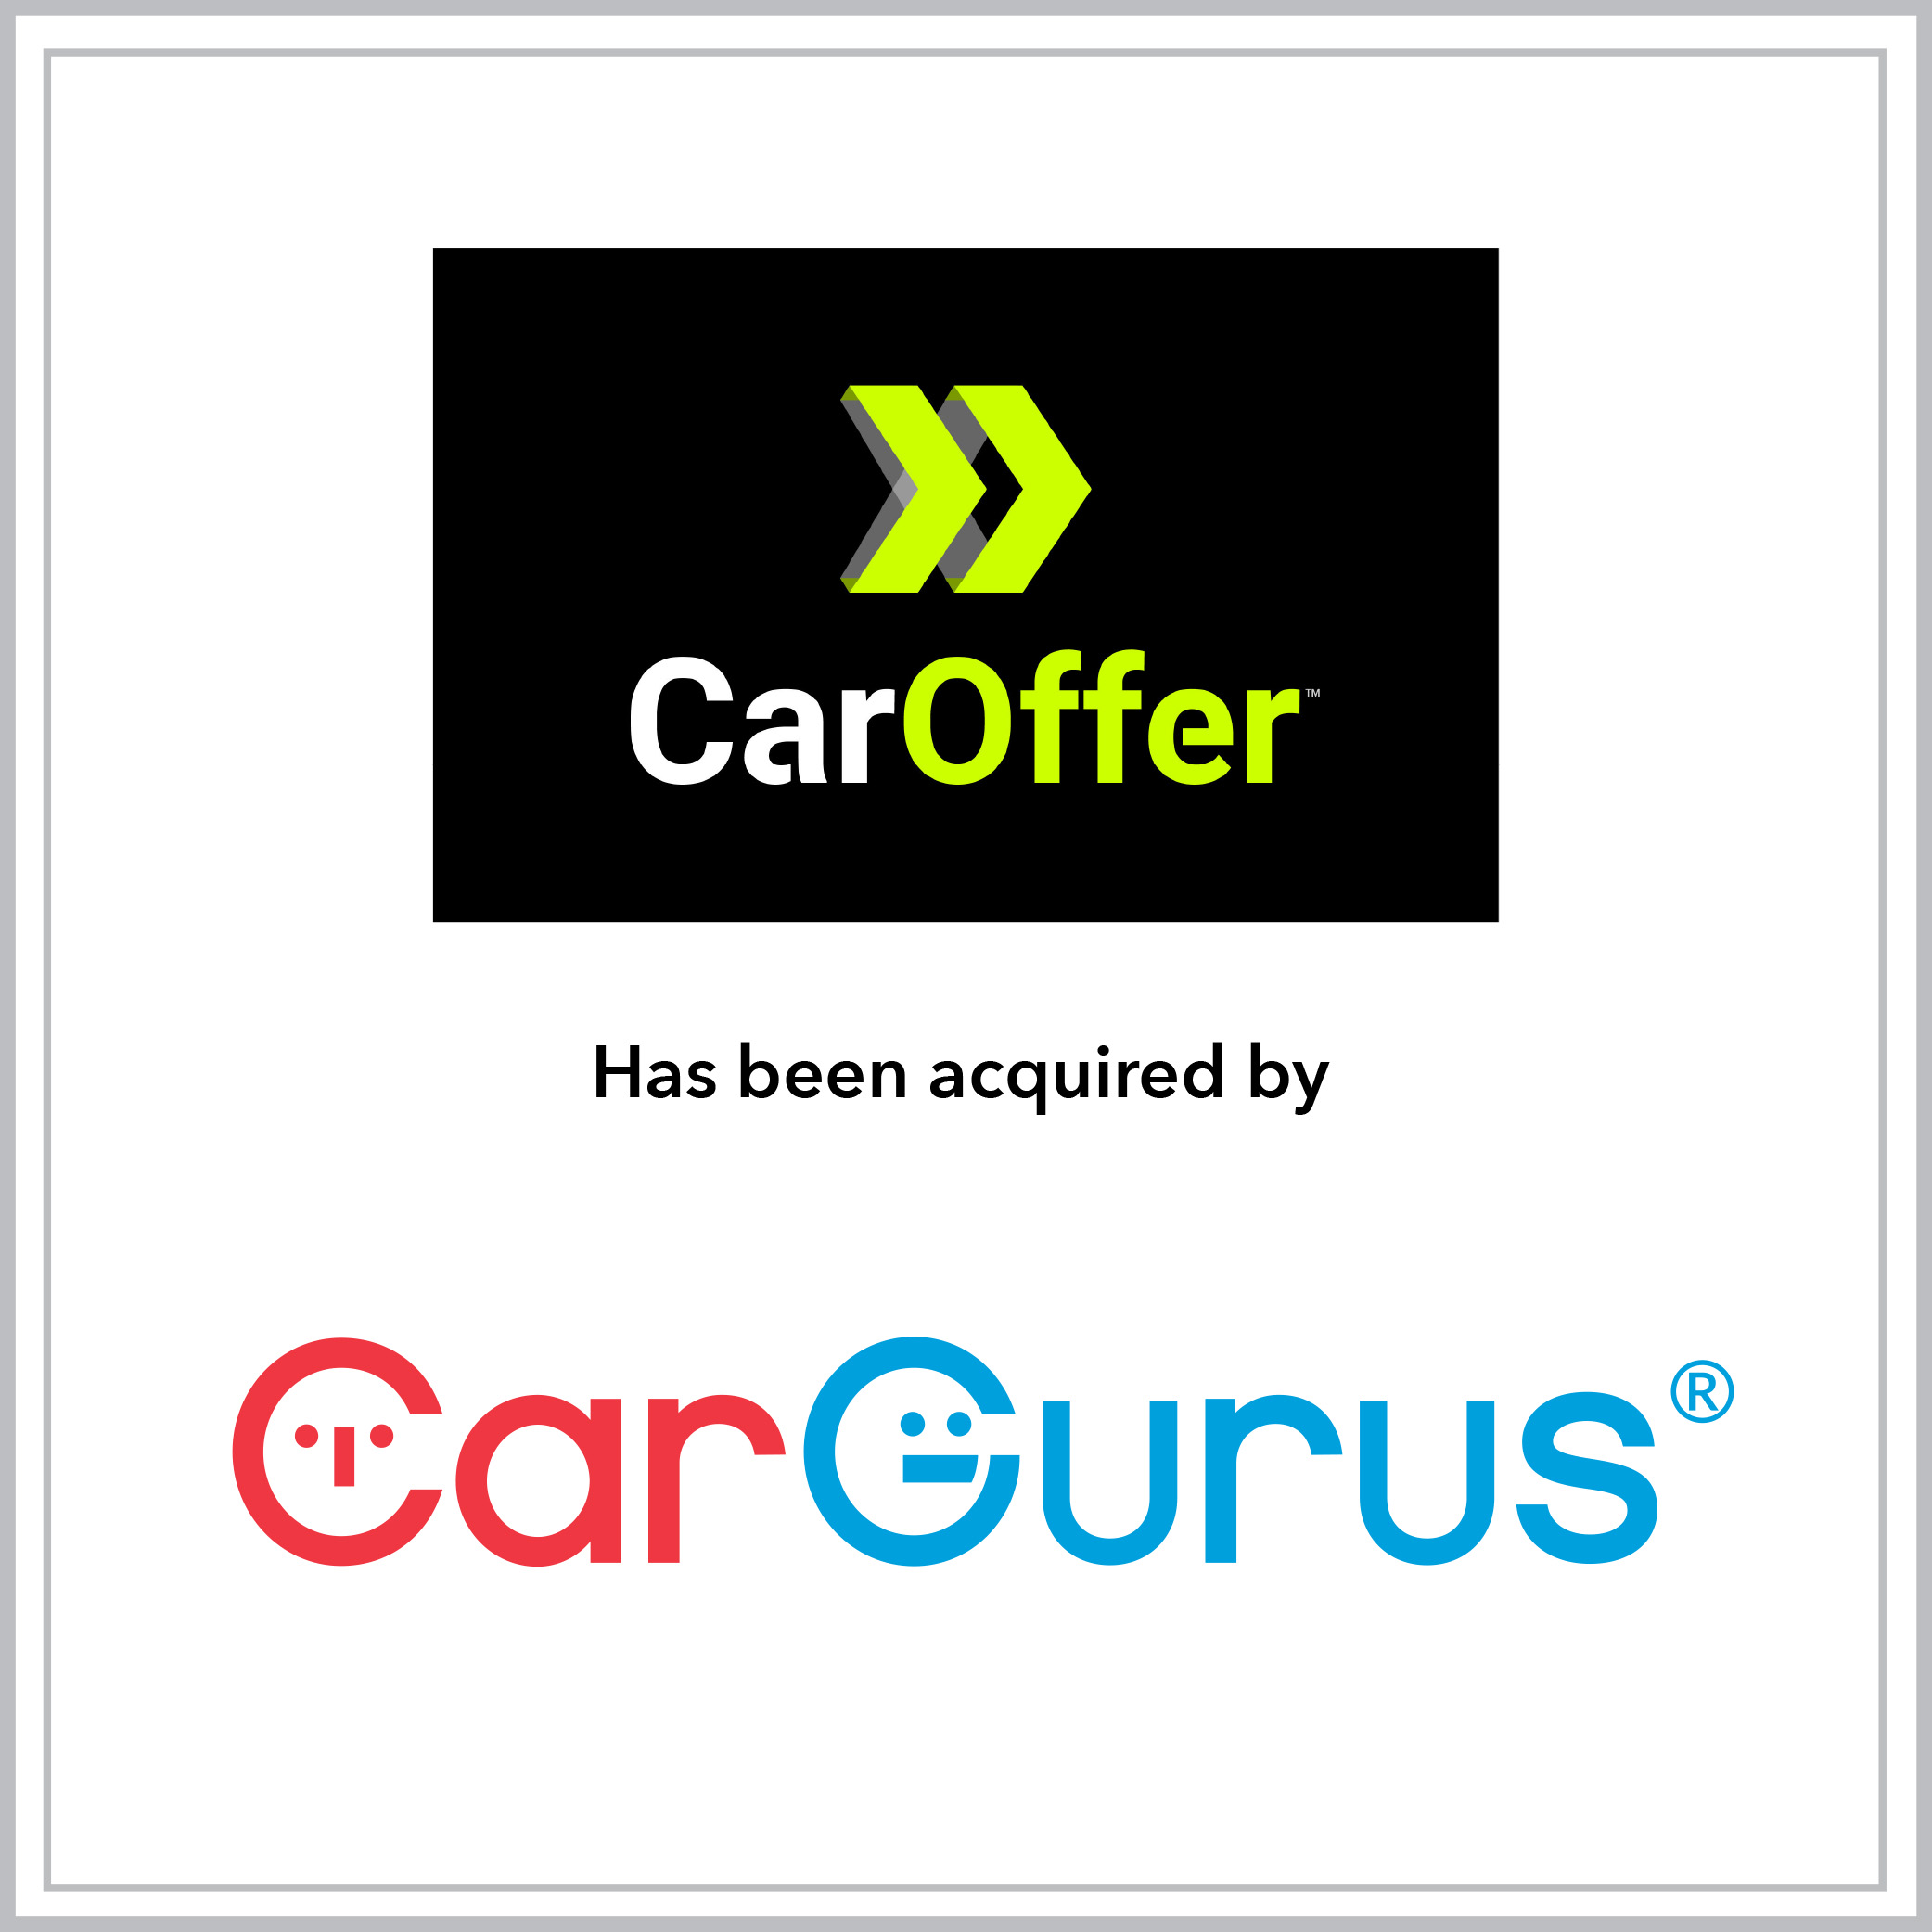 CarOffer has been acquired by CarGurus